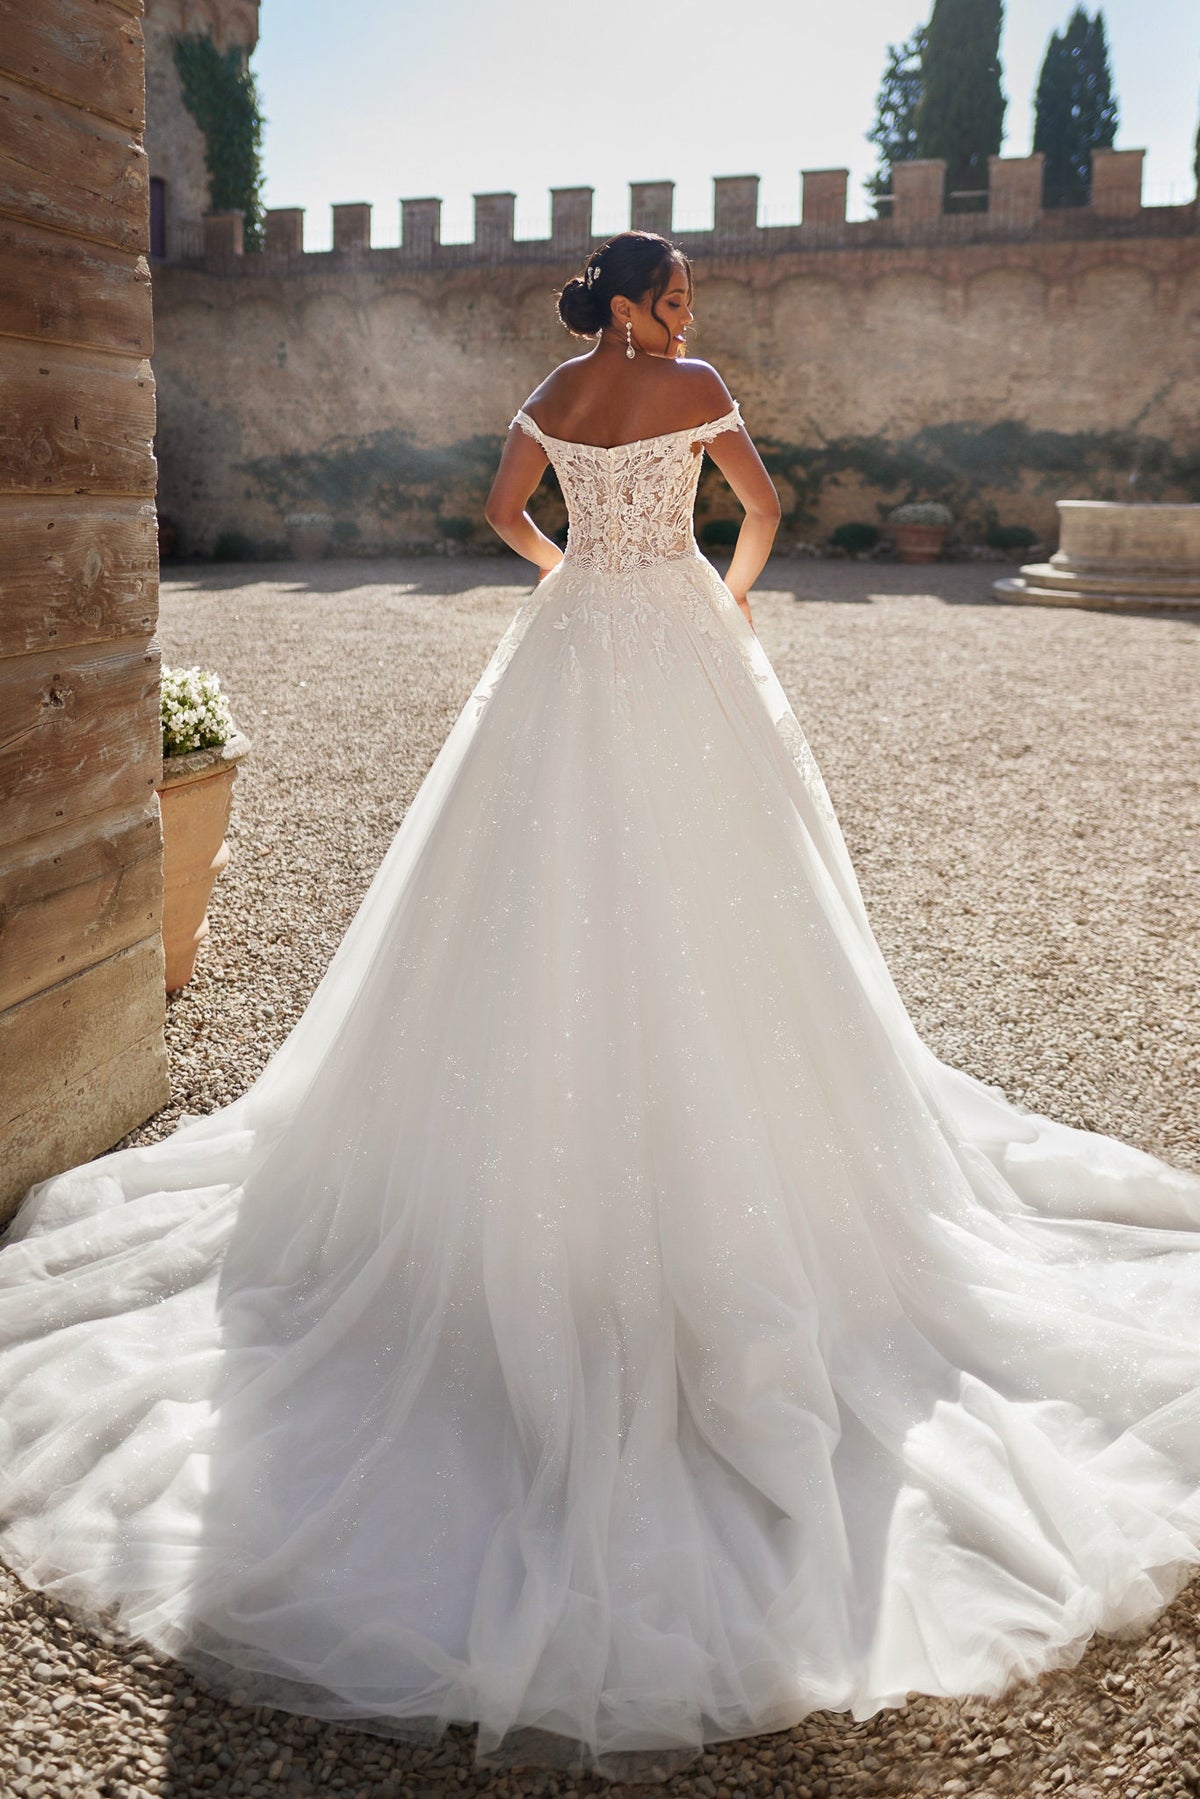 Enchanting Off-Shoulder Tulle Ball Gown Wedding Dress with Plunging Neckline, Detachable Puffy Sleeves, and Delicate Lace Appliqués